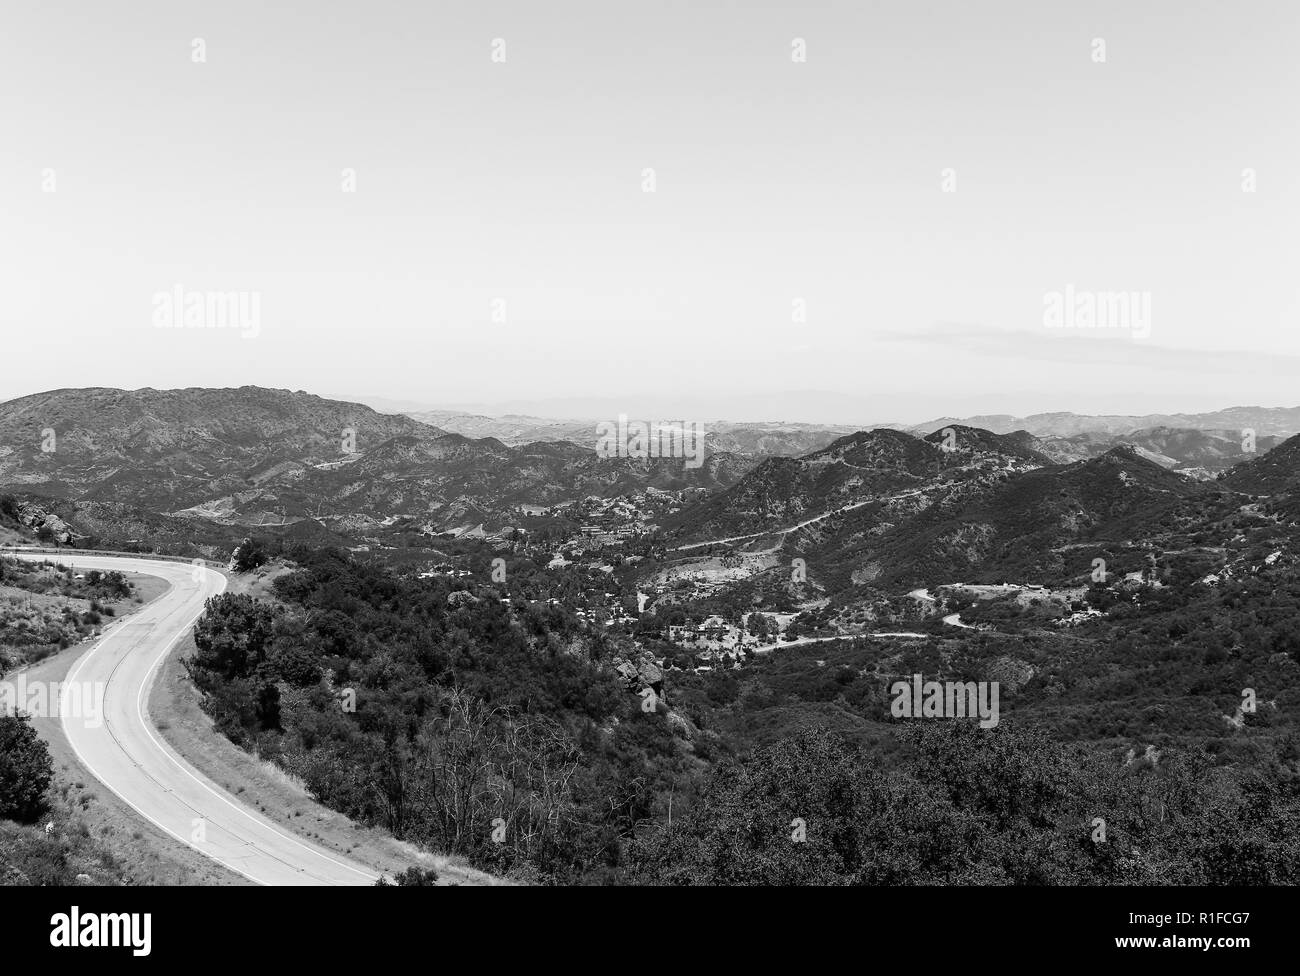 The Mulholland Highway in Los Angeles near Rocky Oaks Park in black and white. Stock Photo